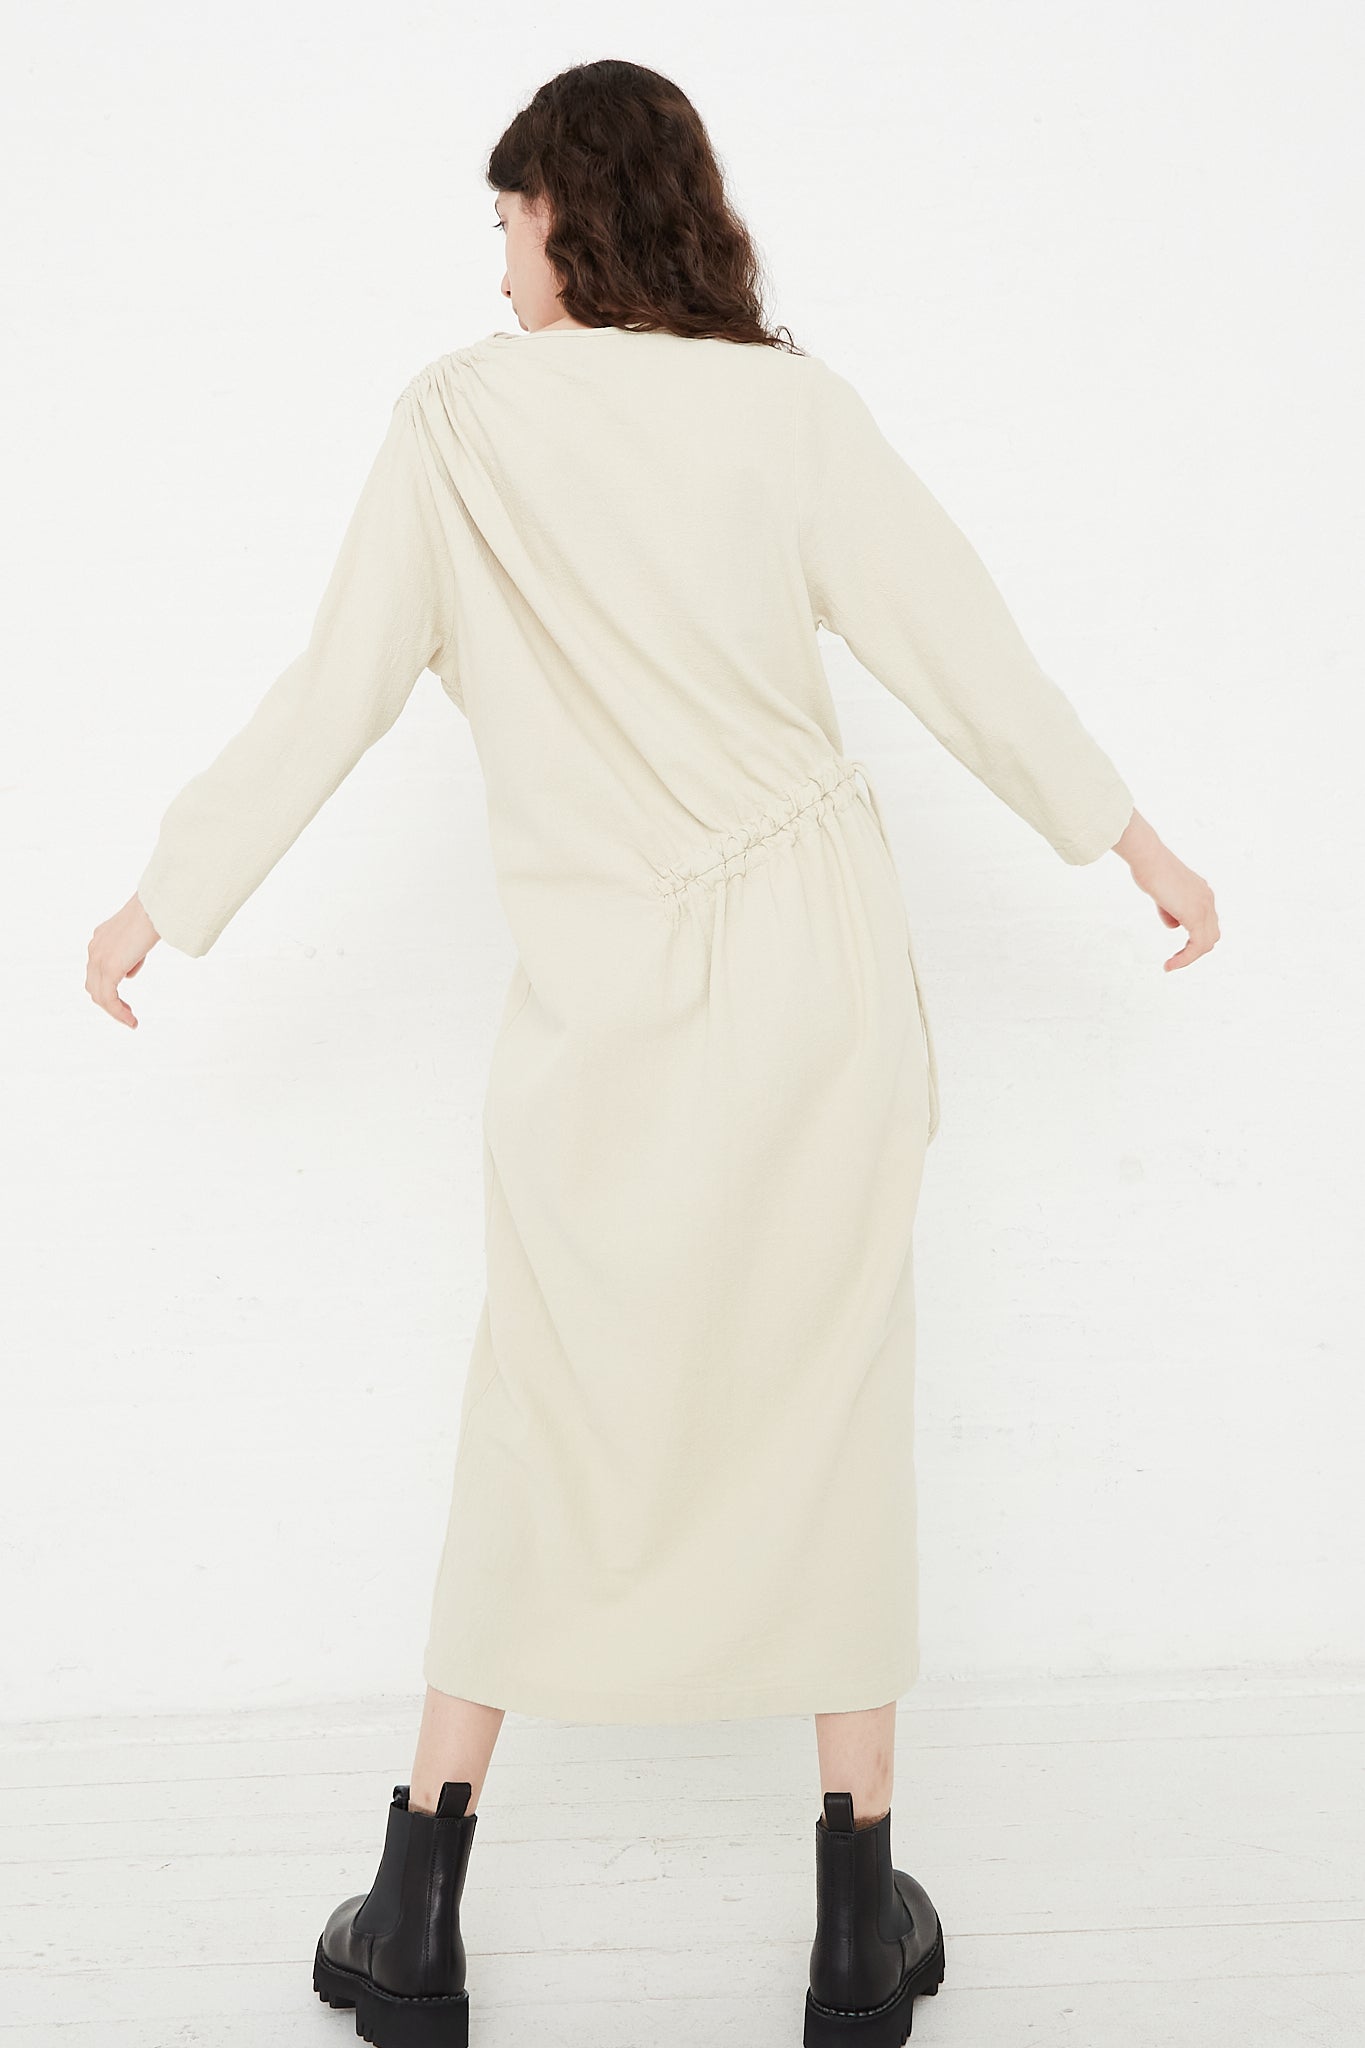 Cotton Woven Ruched Dress in Ivory by Black Crane for Oroboro Back